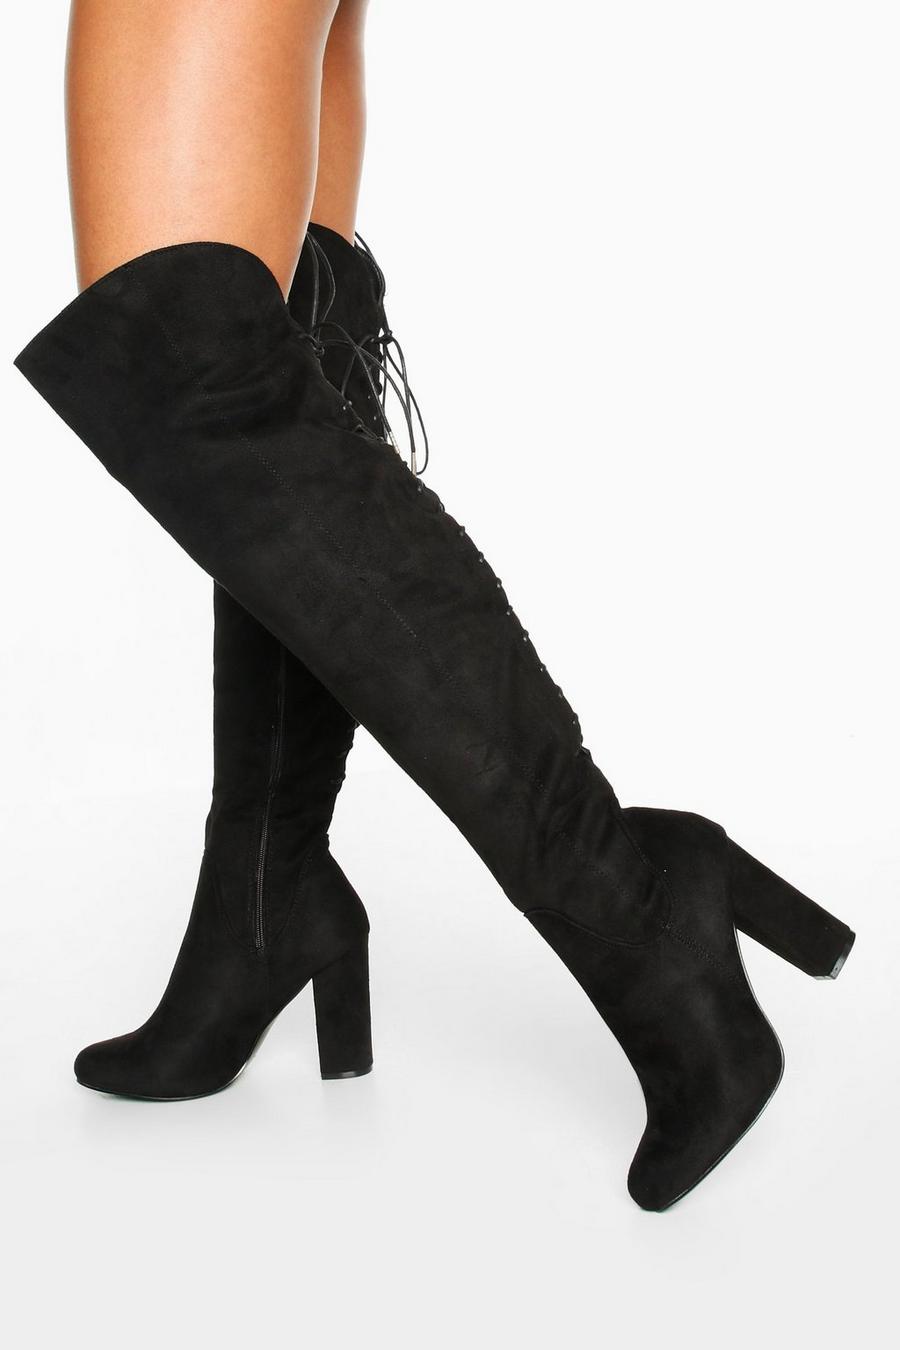 Black Lace Back Block Heel Over The Knee High Boots image number 1